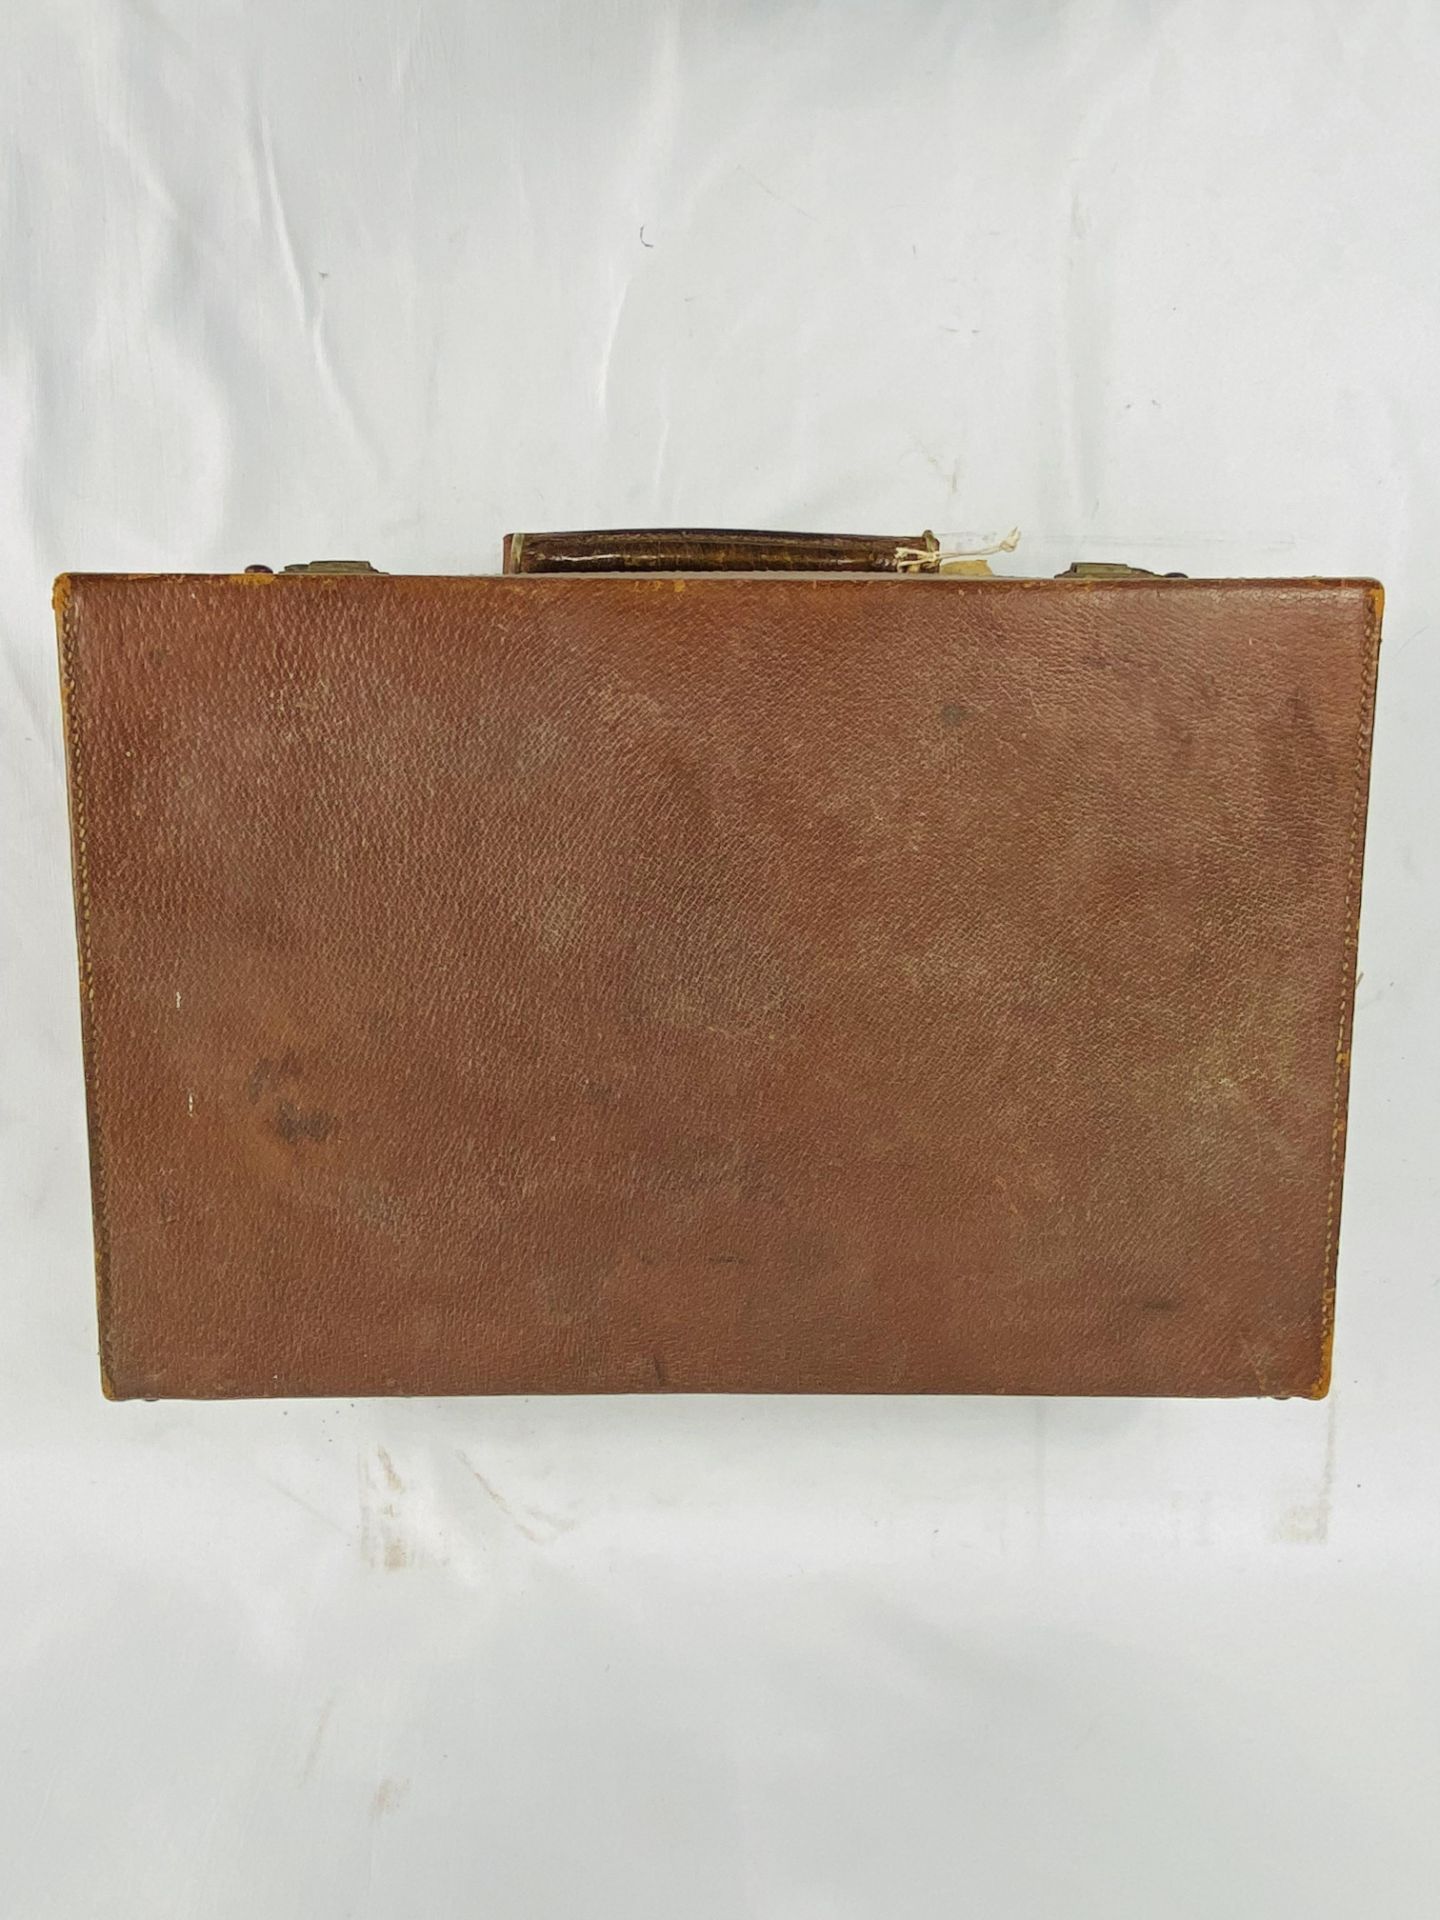 Drew & Sons pig skin attache case - Image 2 of 6